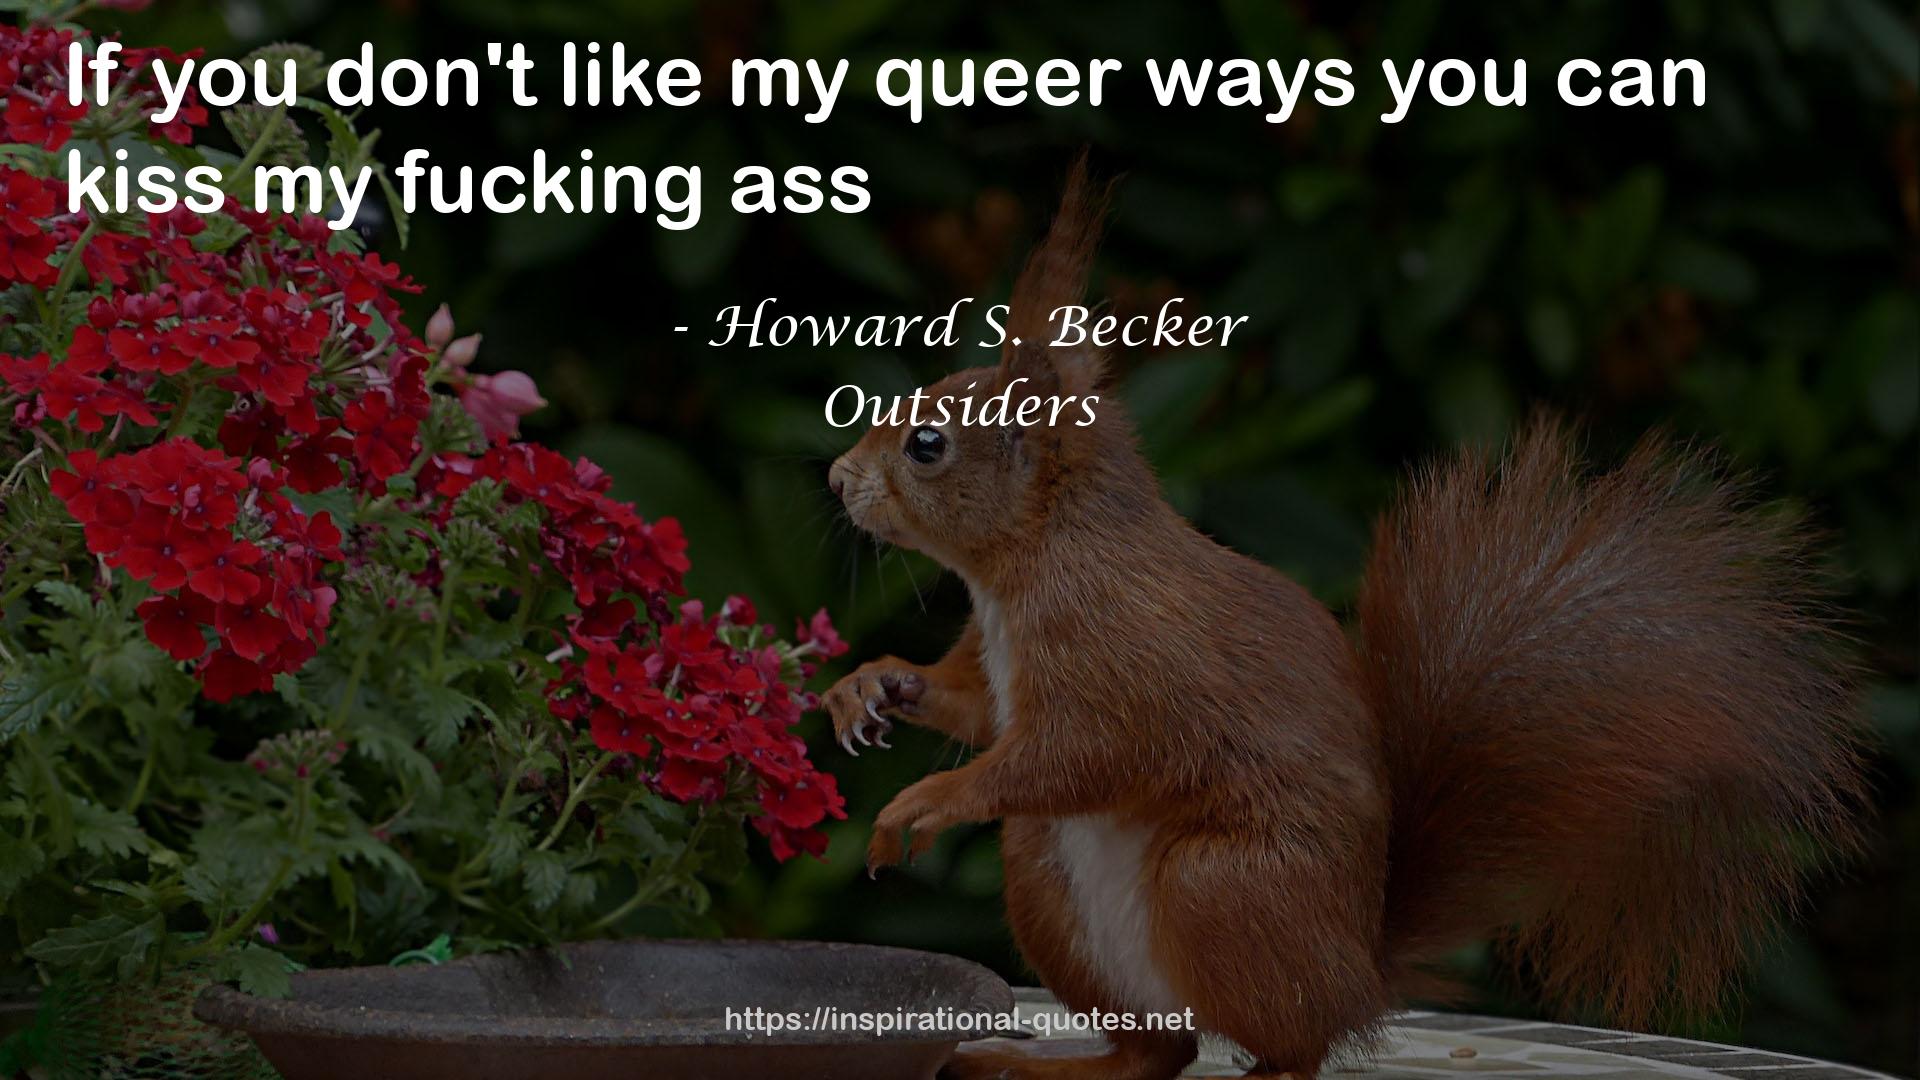 Outsiders QUOTES